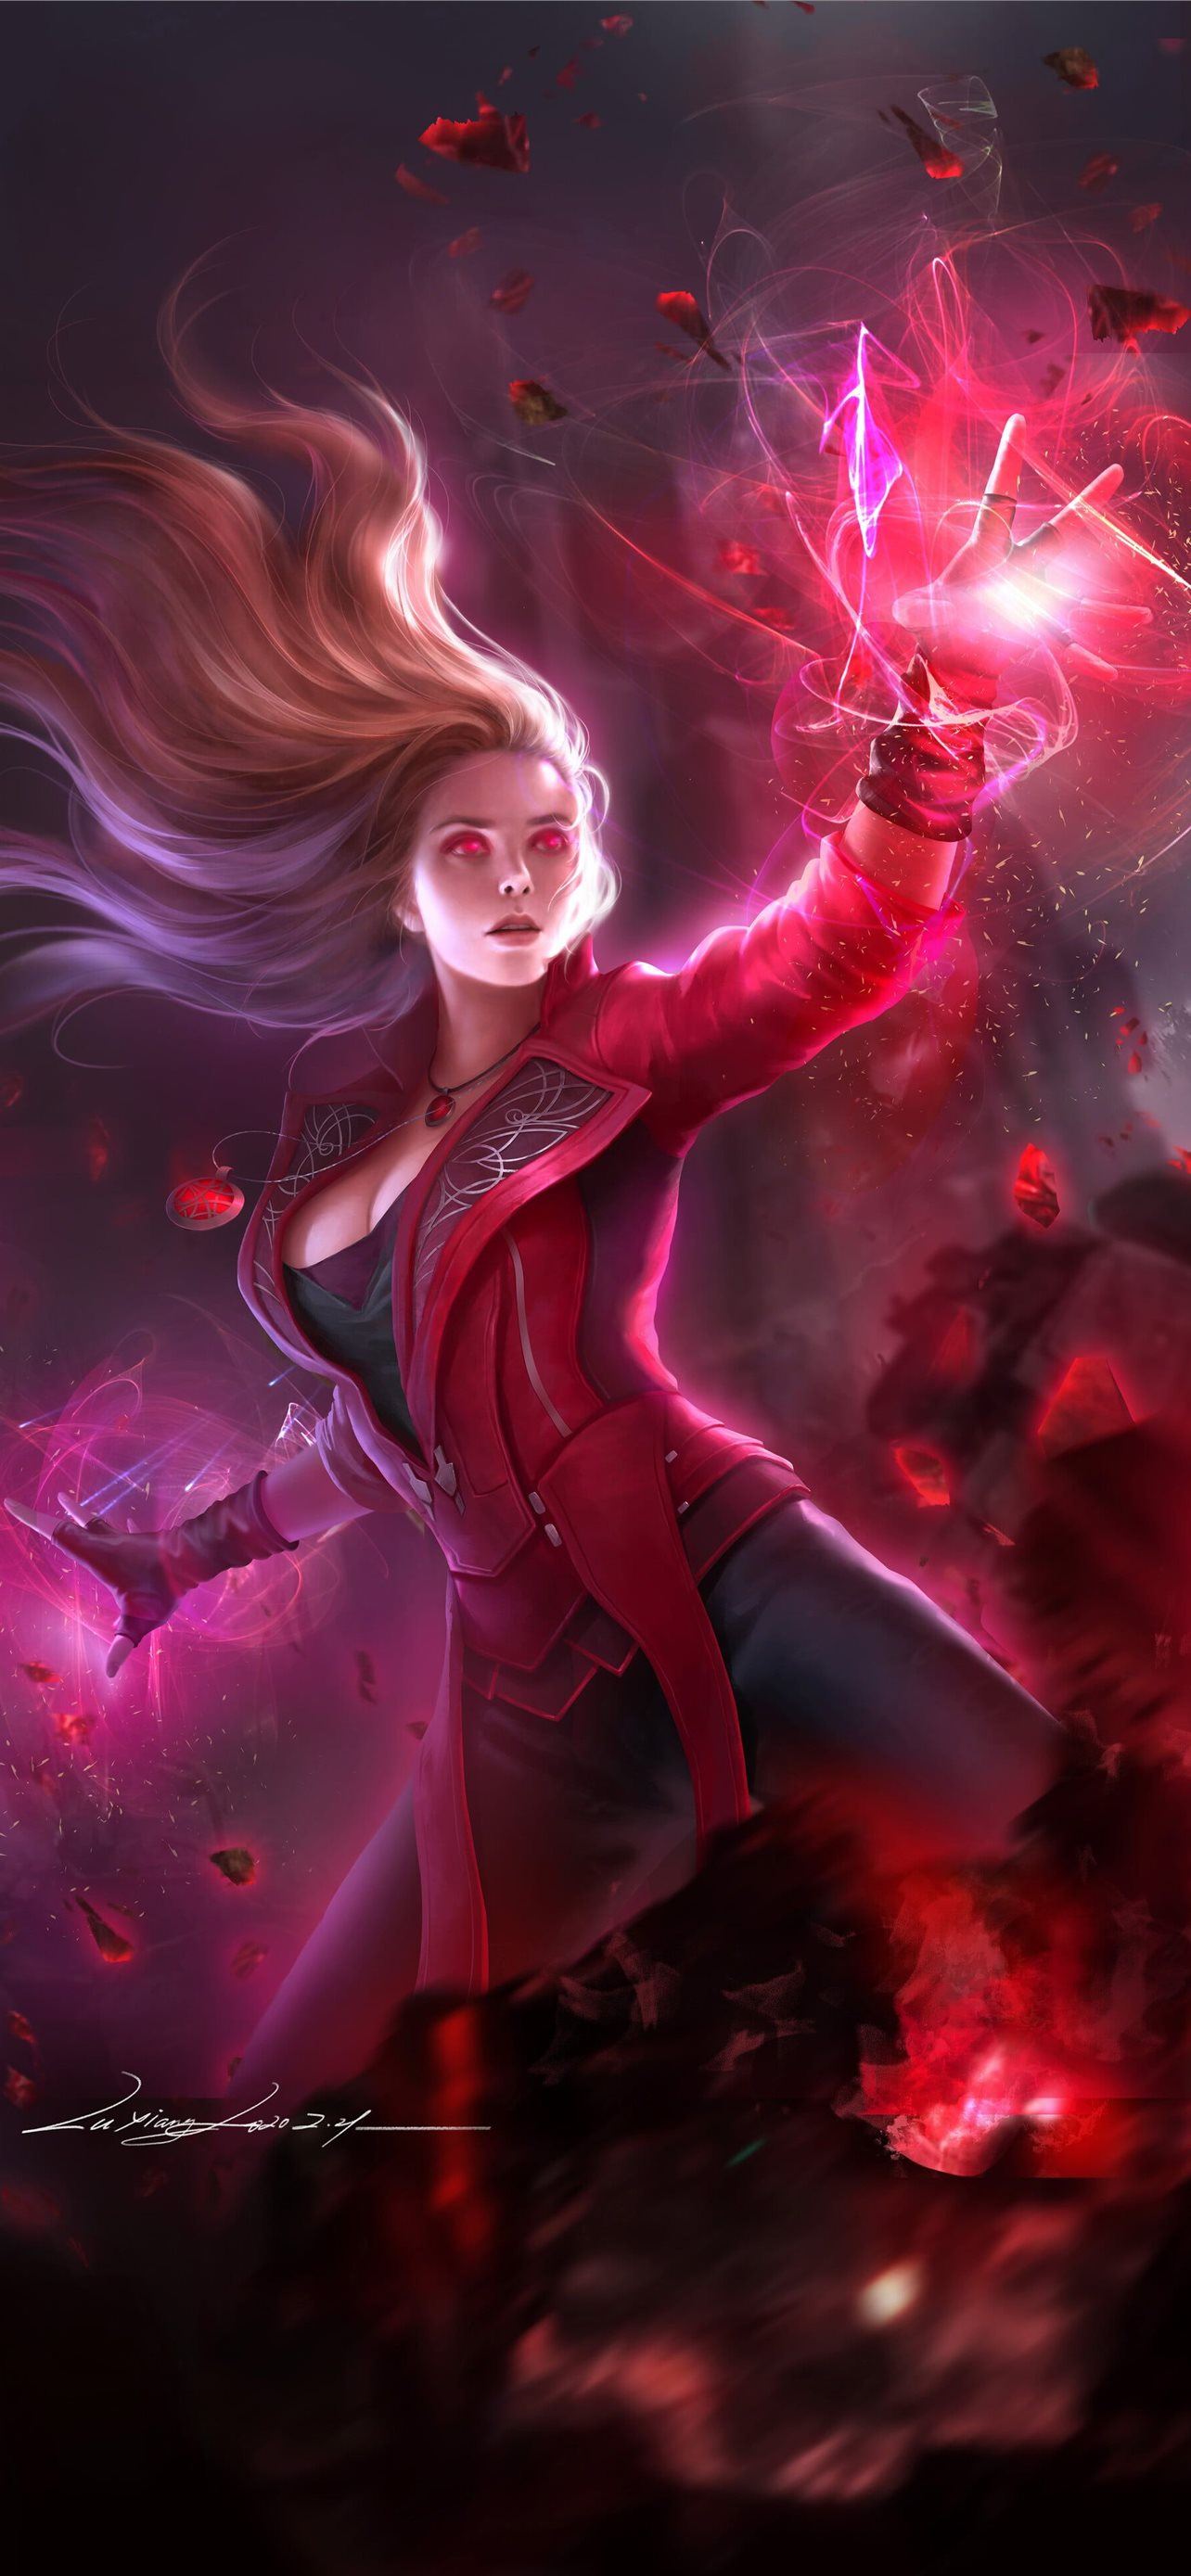 iPhone Wallpapers  Page 11 of 885  Wallpapers for iPhone 12 iPhone 11  and iPhone X  iPhone Wallpapers  Scarlet witch Marvel superheroes Scarlet  witch marvel